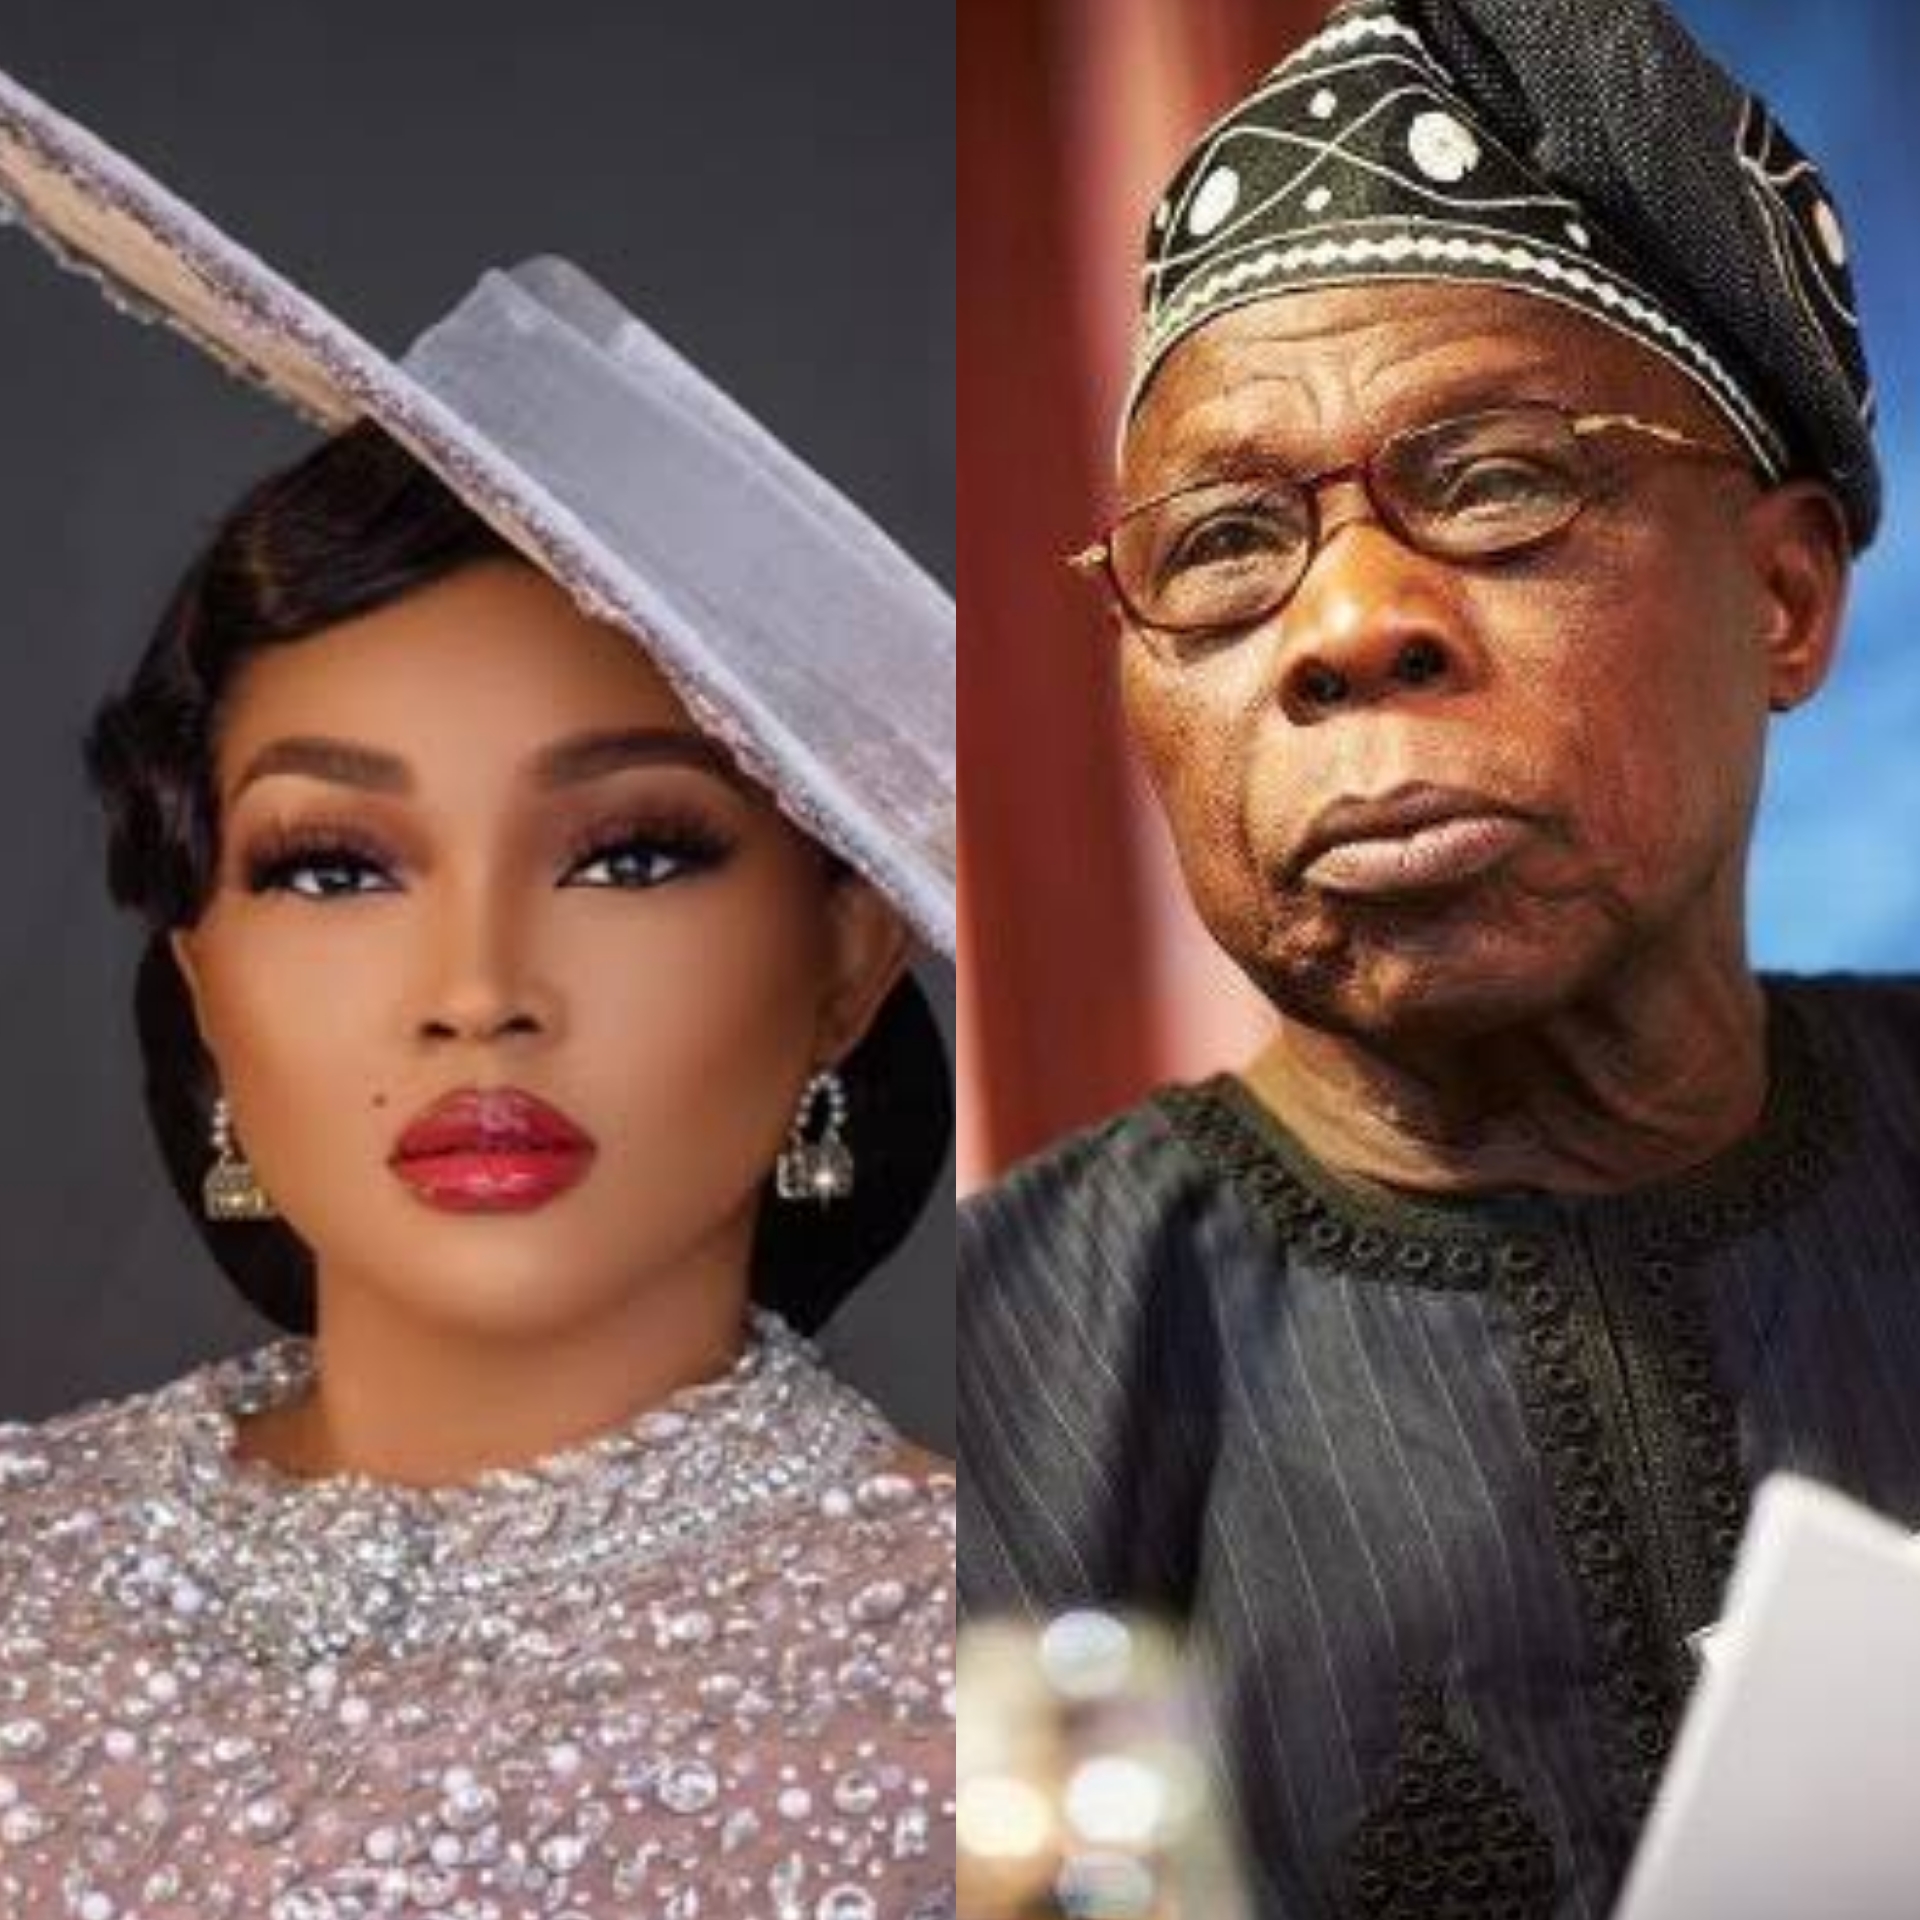 Mercy Aigbe Greets Obj While On Her Knees At A Recent Church Event, Drawing Social Media Attention 1